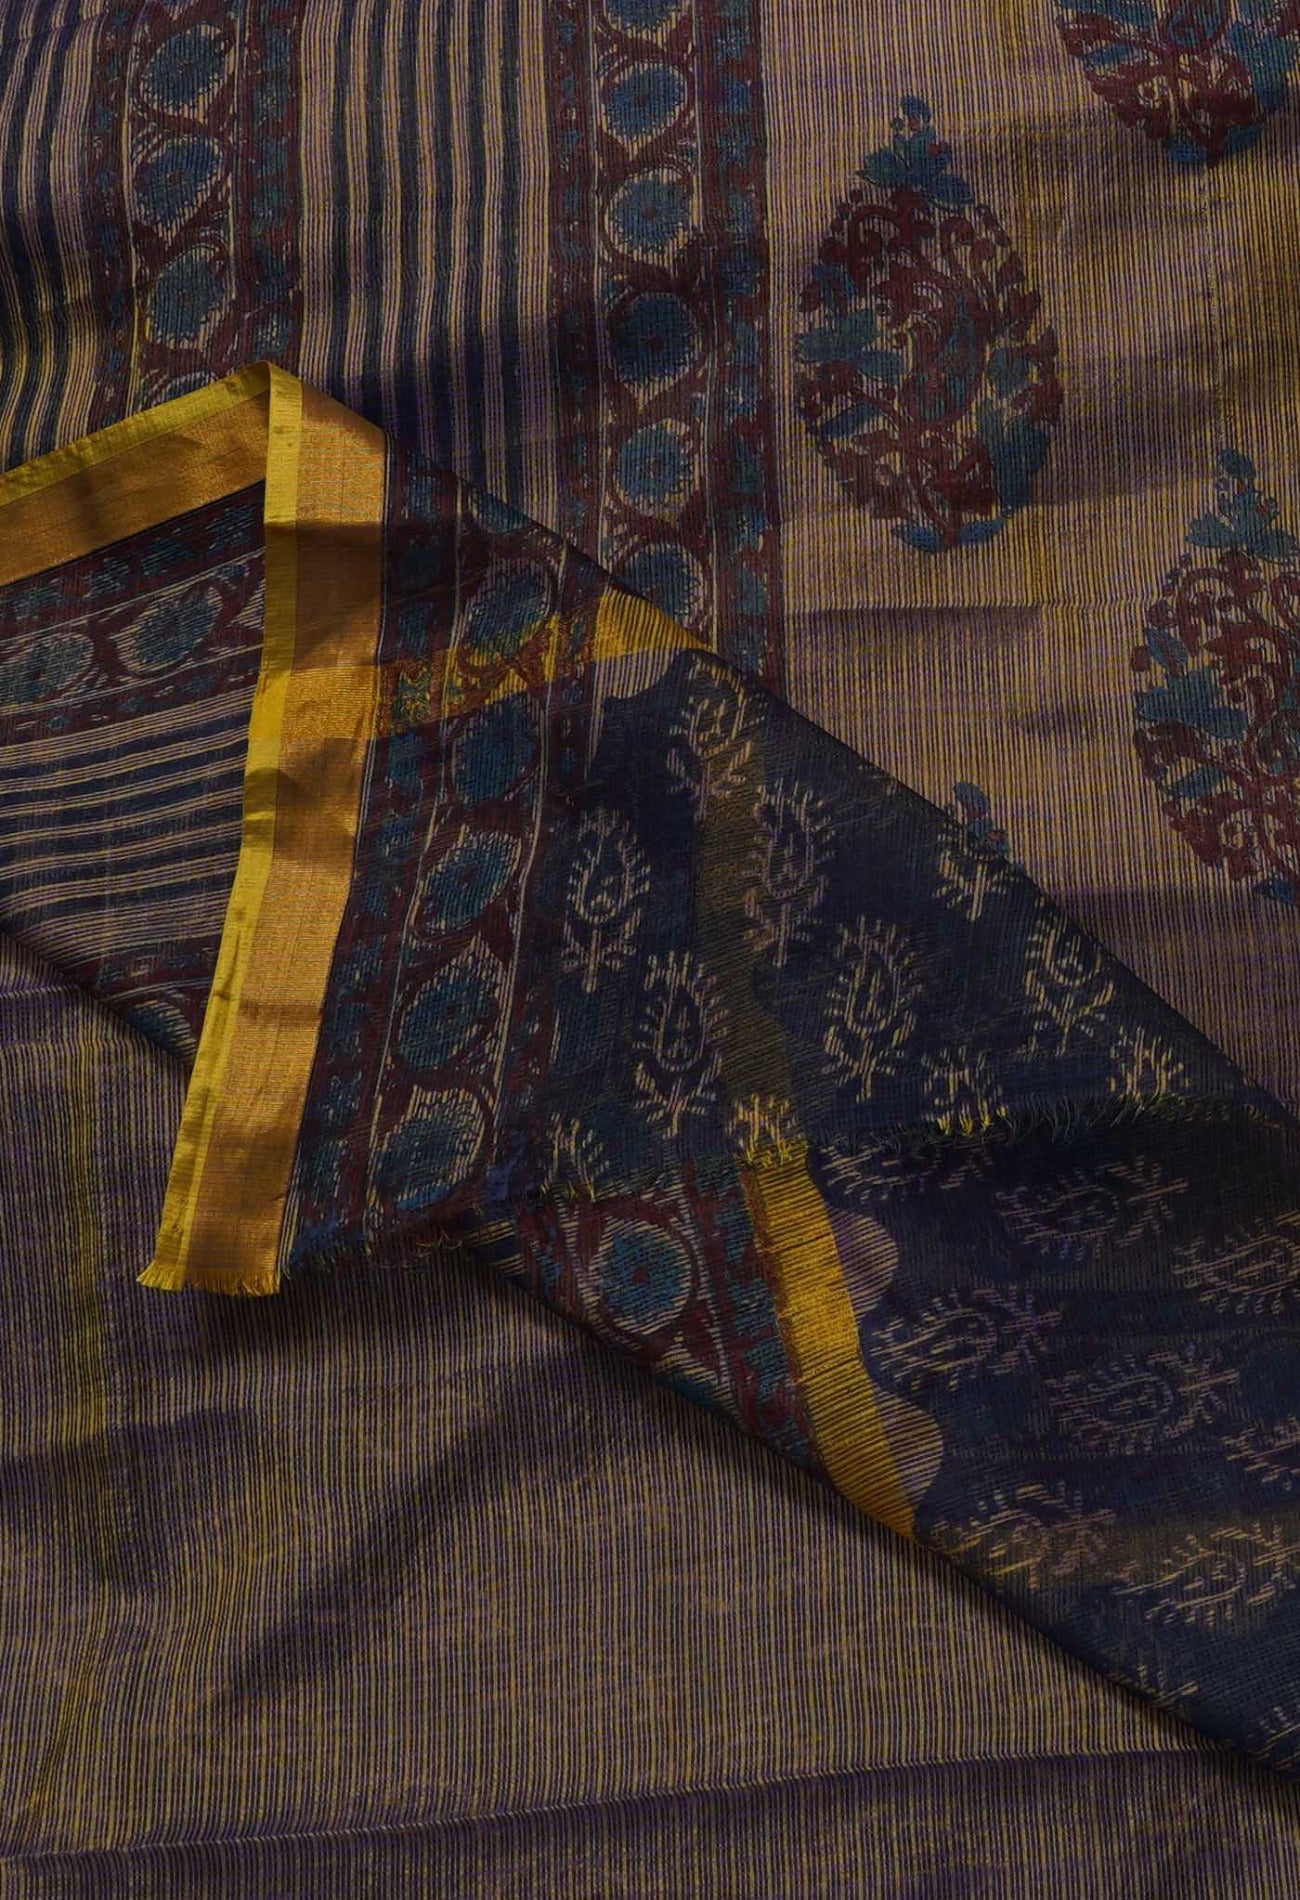 Online Shopping for Navy Blue Pure Kota Hand Block Print Silk Saree with Hand Block Prints from Rajasthan at Unnatisilks.com India
